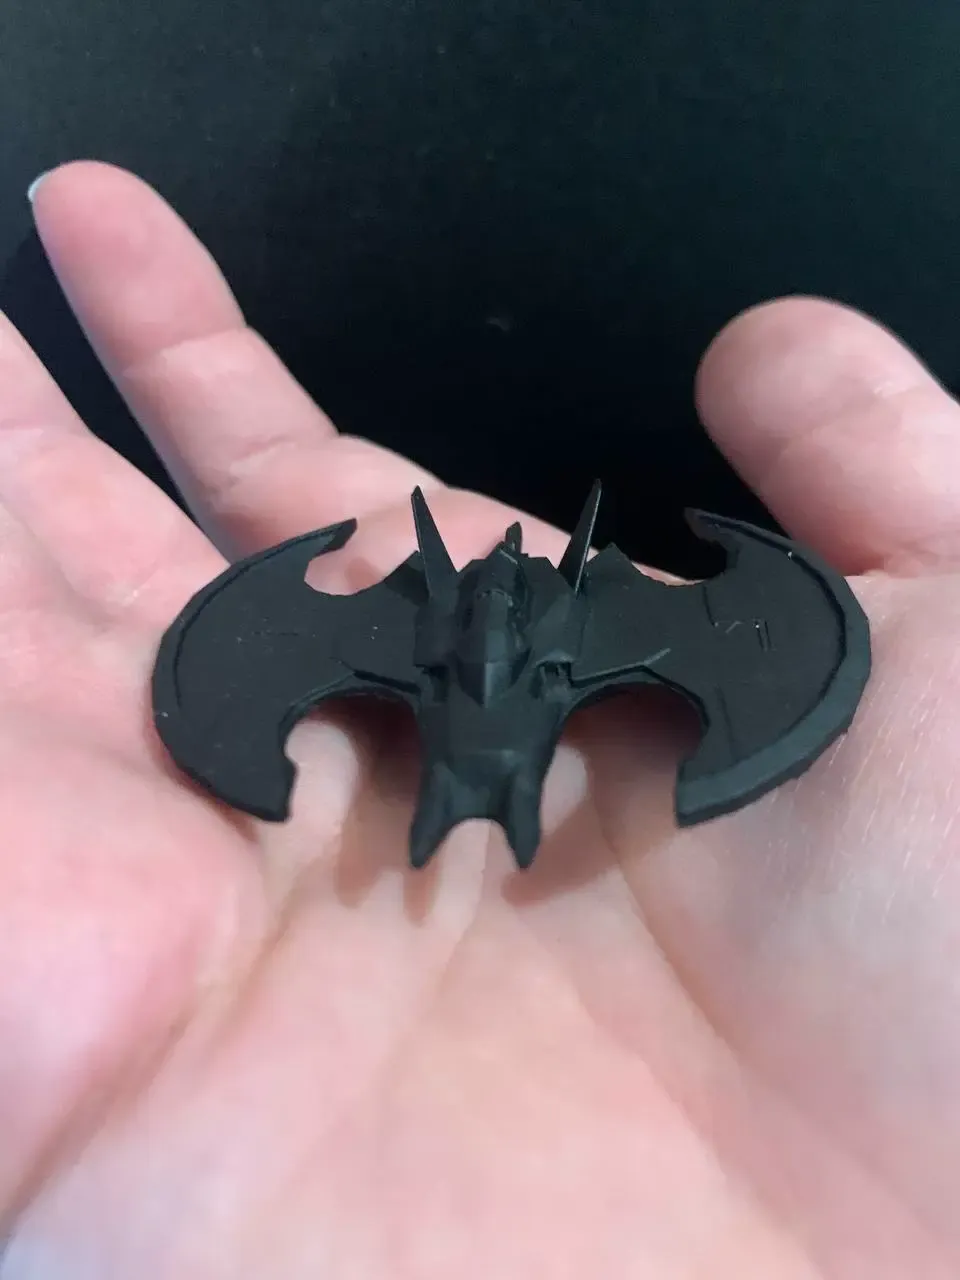 THE BATWING - LOW POLY STYLE STL